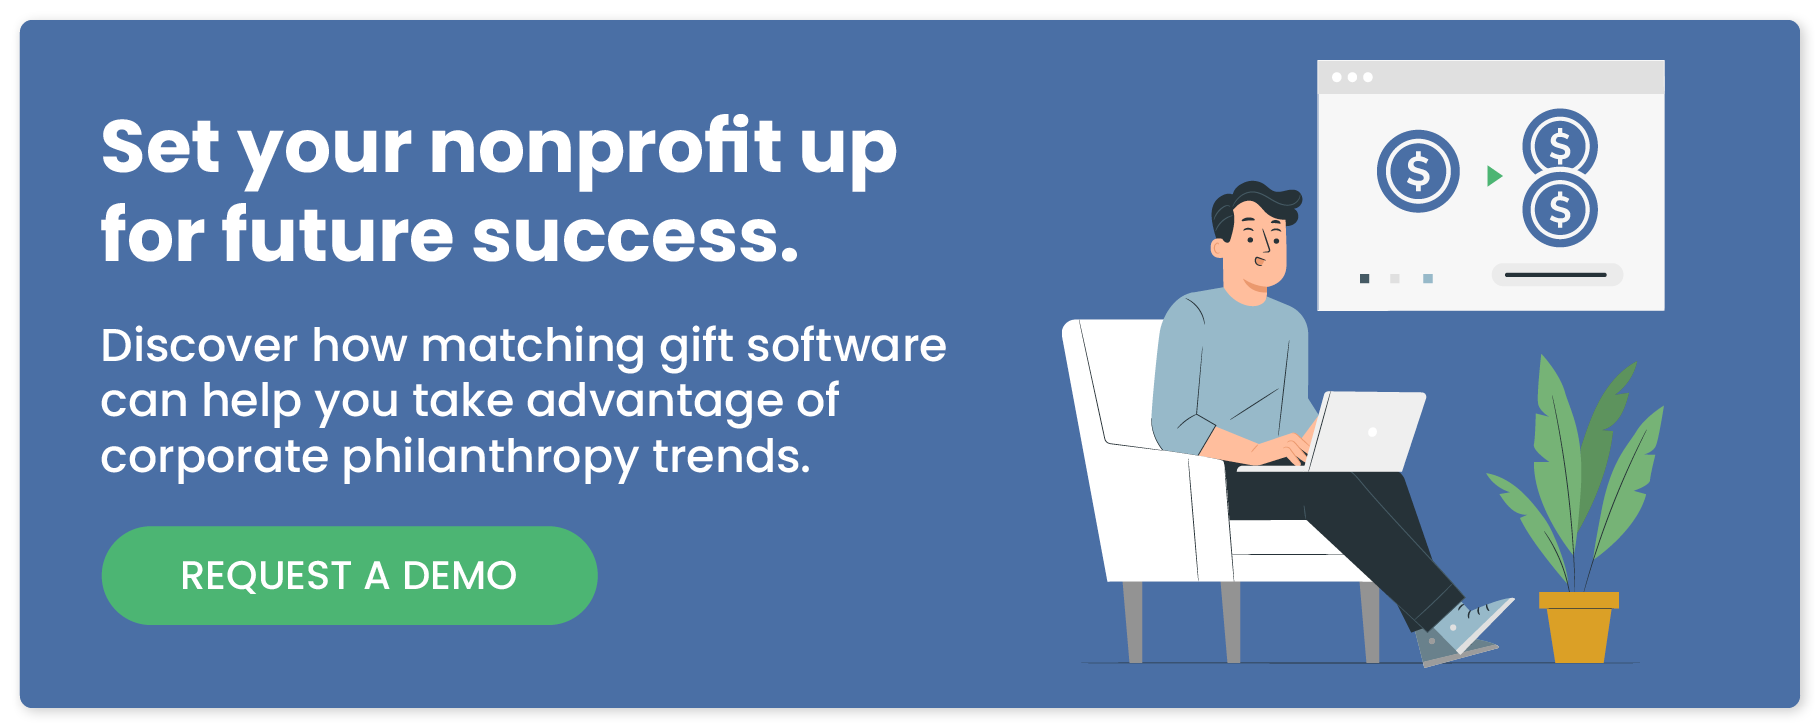 Set your nonprofit up for future success. Discover how matching gift software can help you take advantage of corporate philanthropy trends. Request a demo.